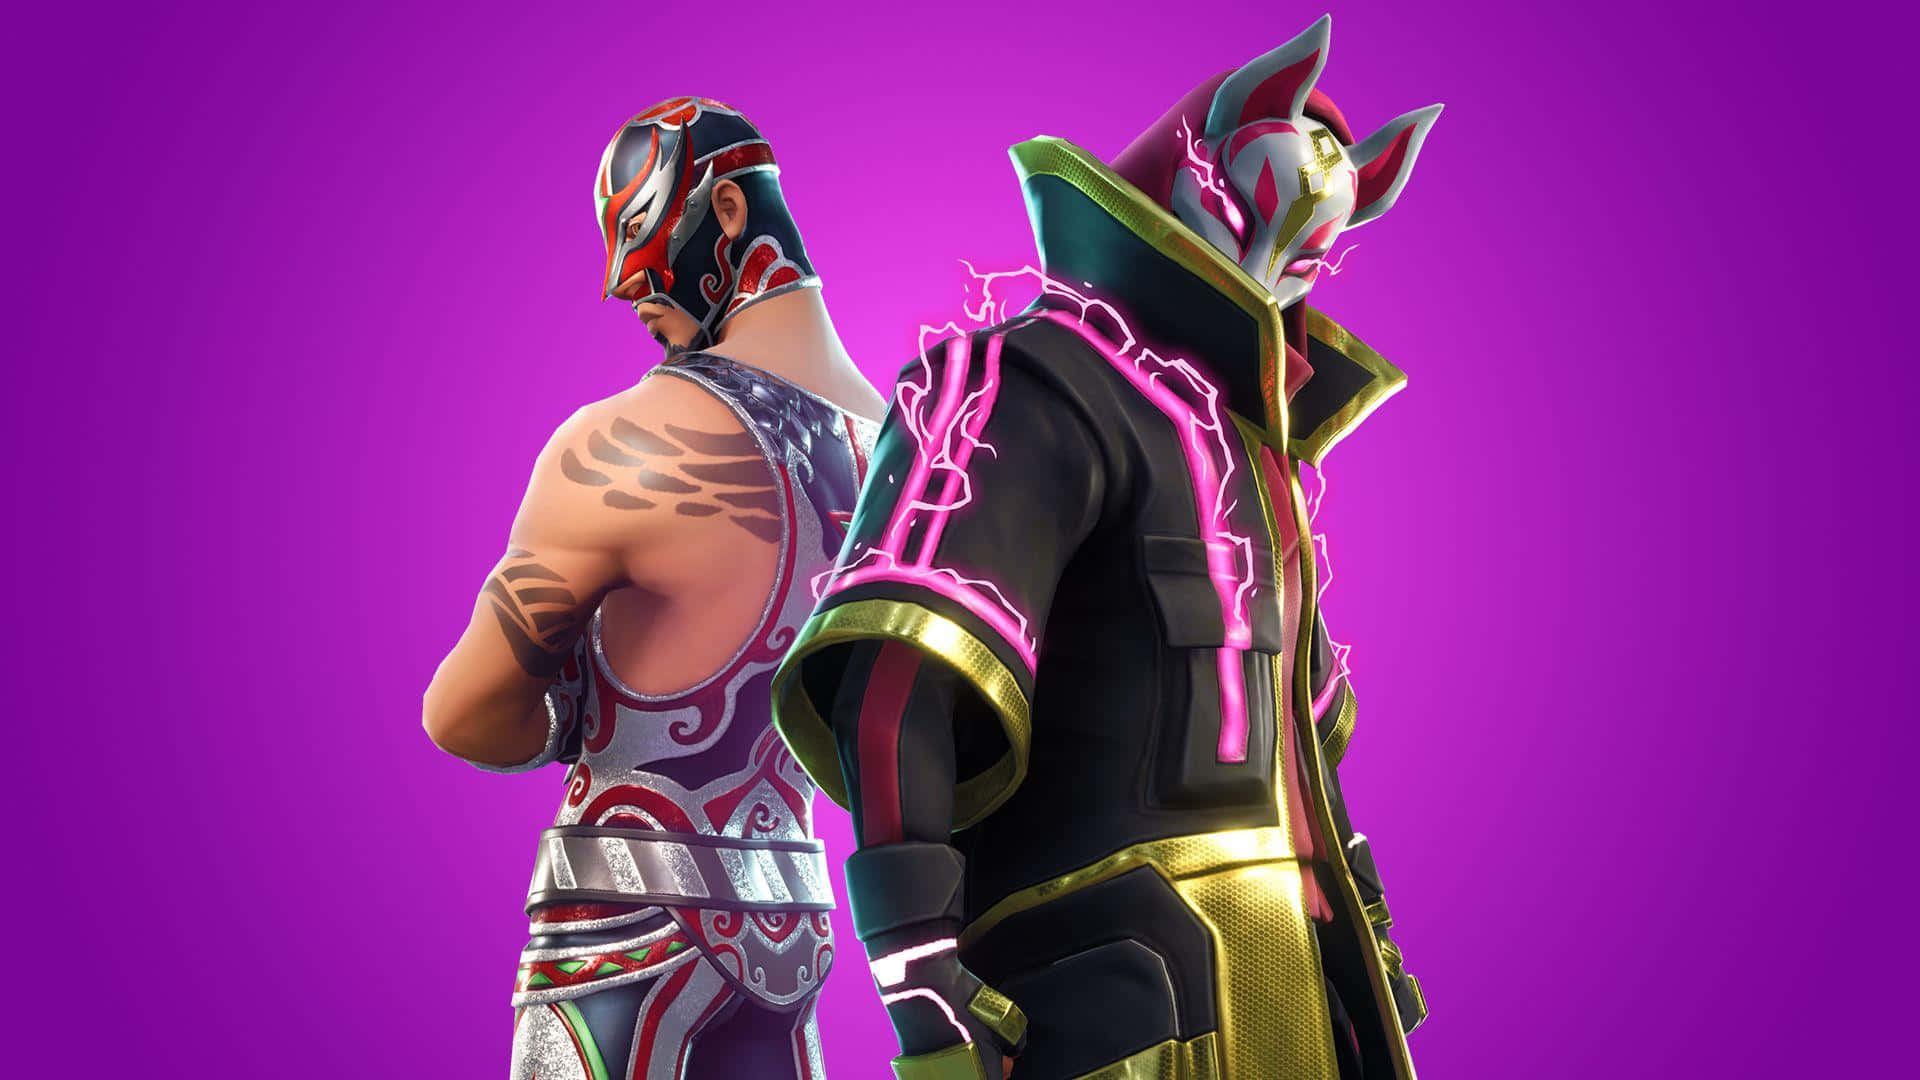 Fornite Masked Characters Wallpaper